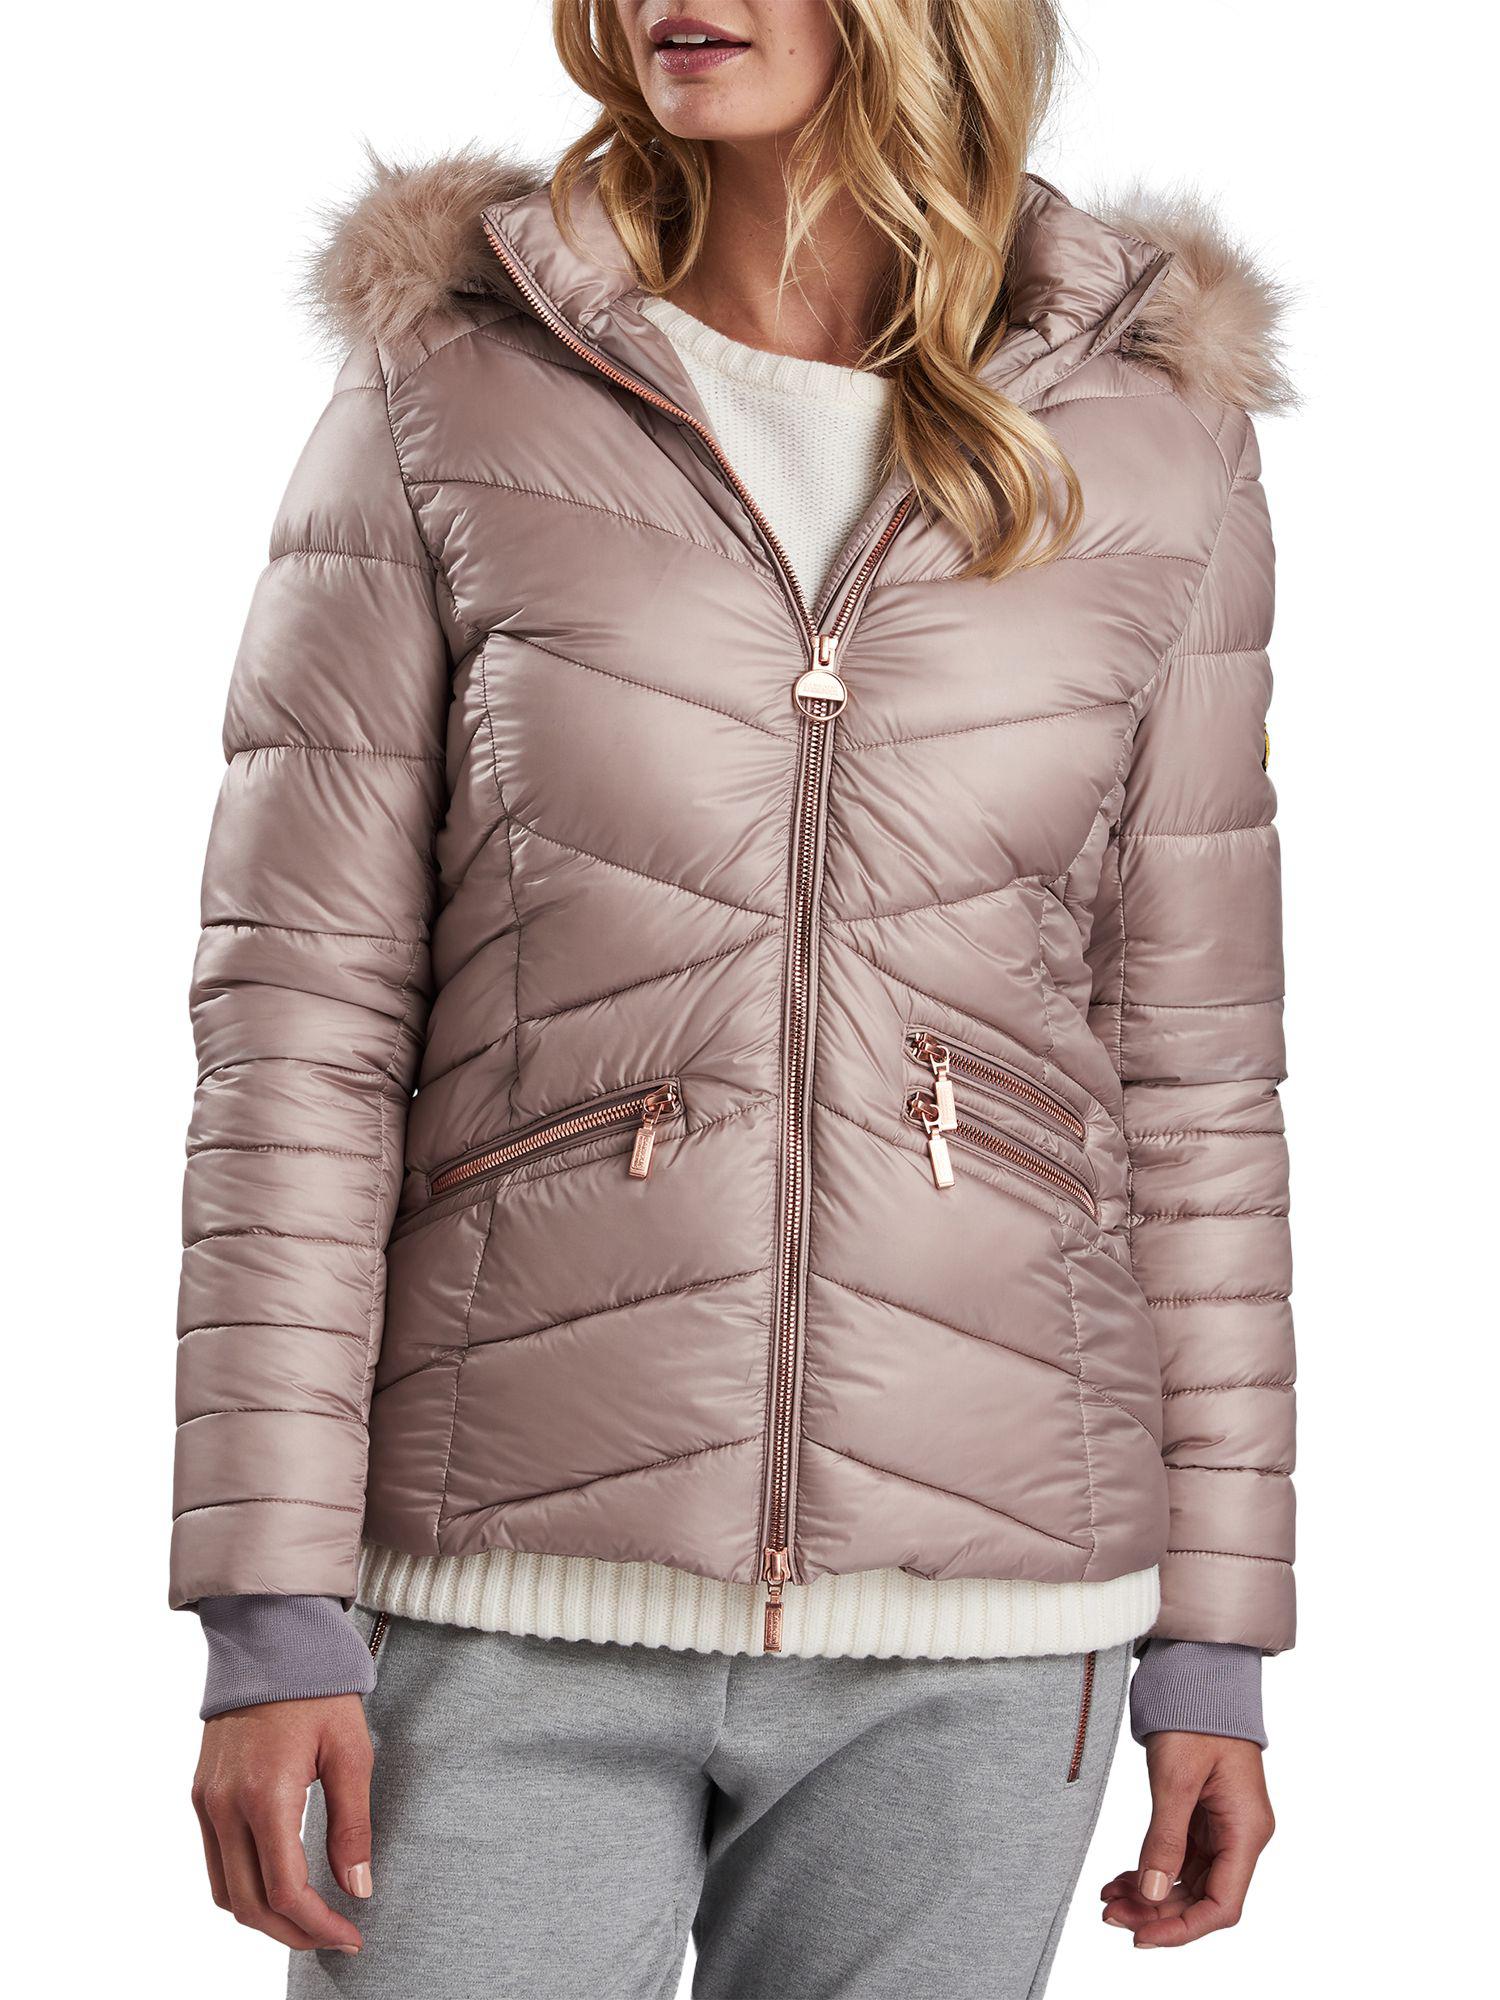 Barbour International Turbo Quilted Hooded Jacket Best Sale, SAVE 54%.